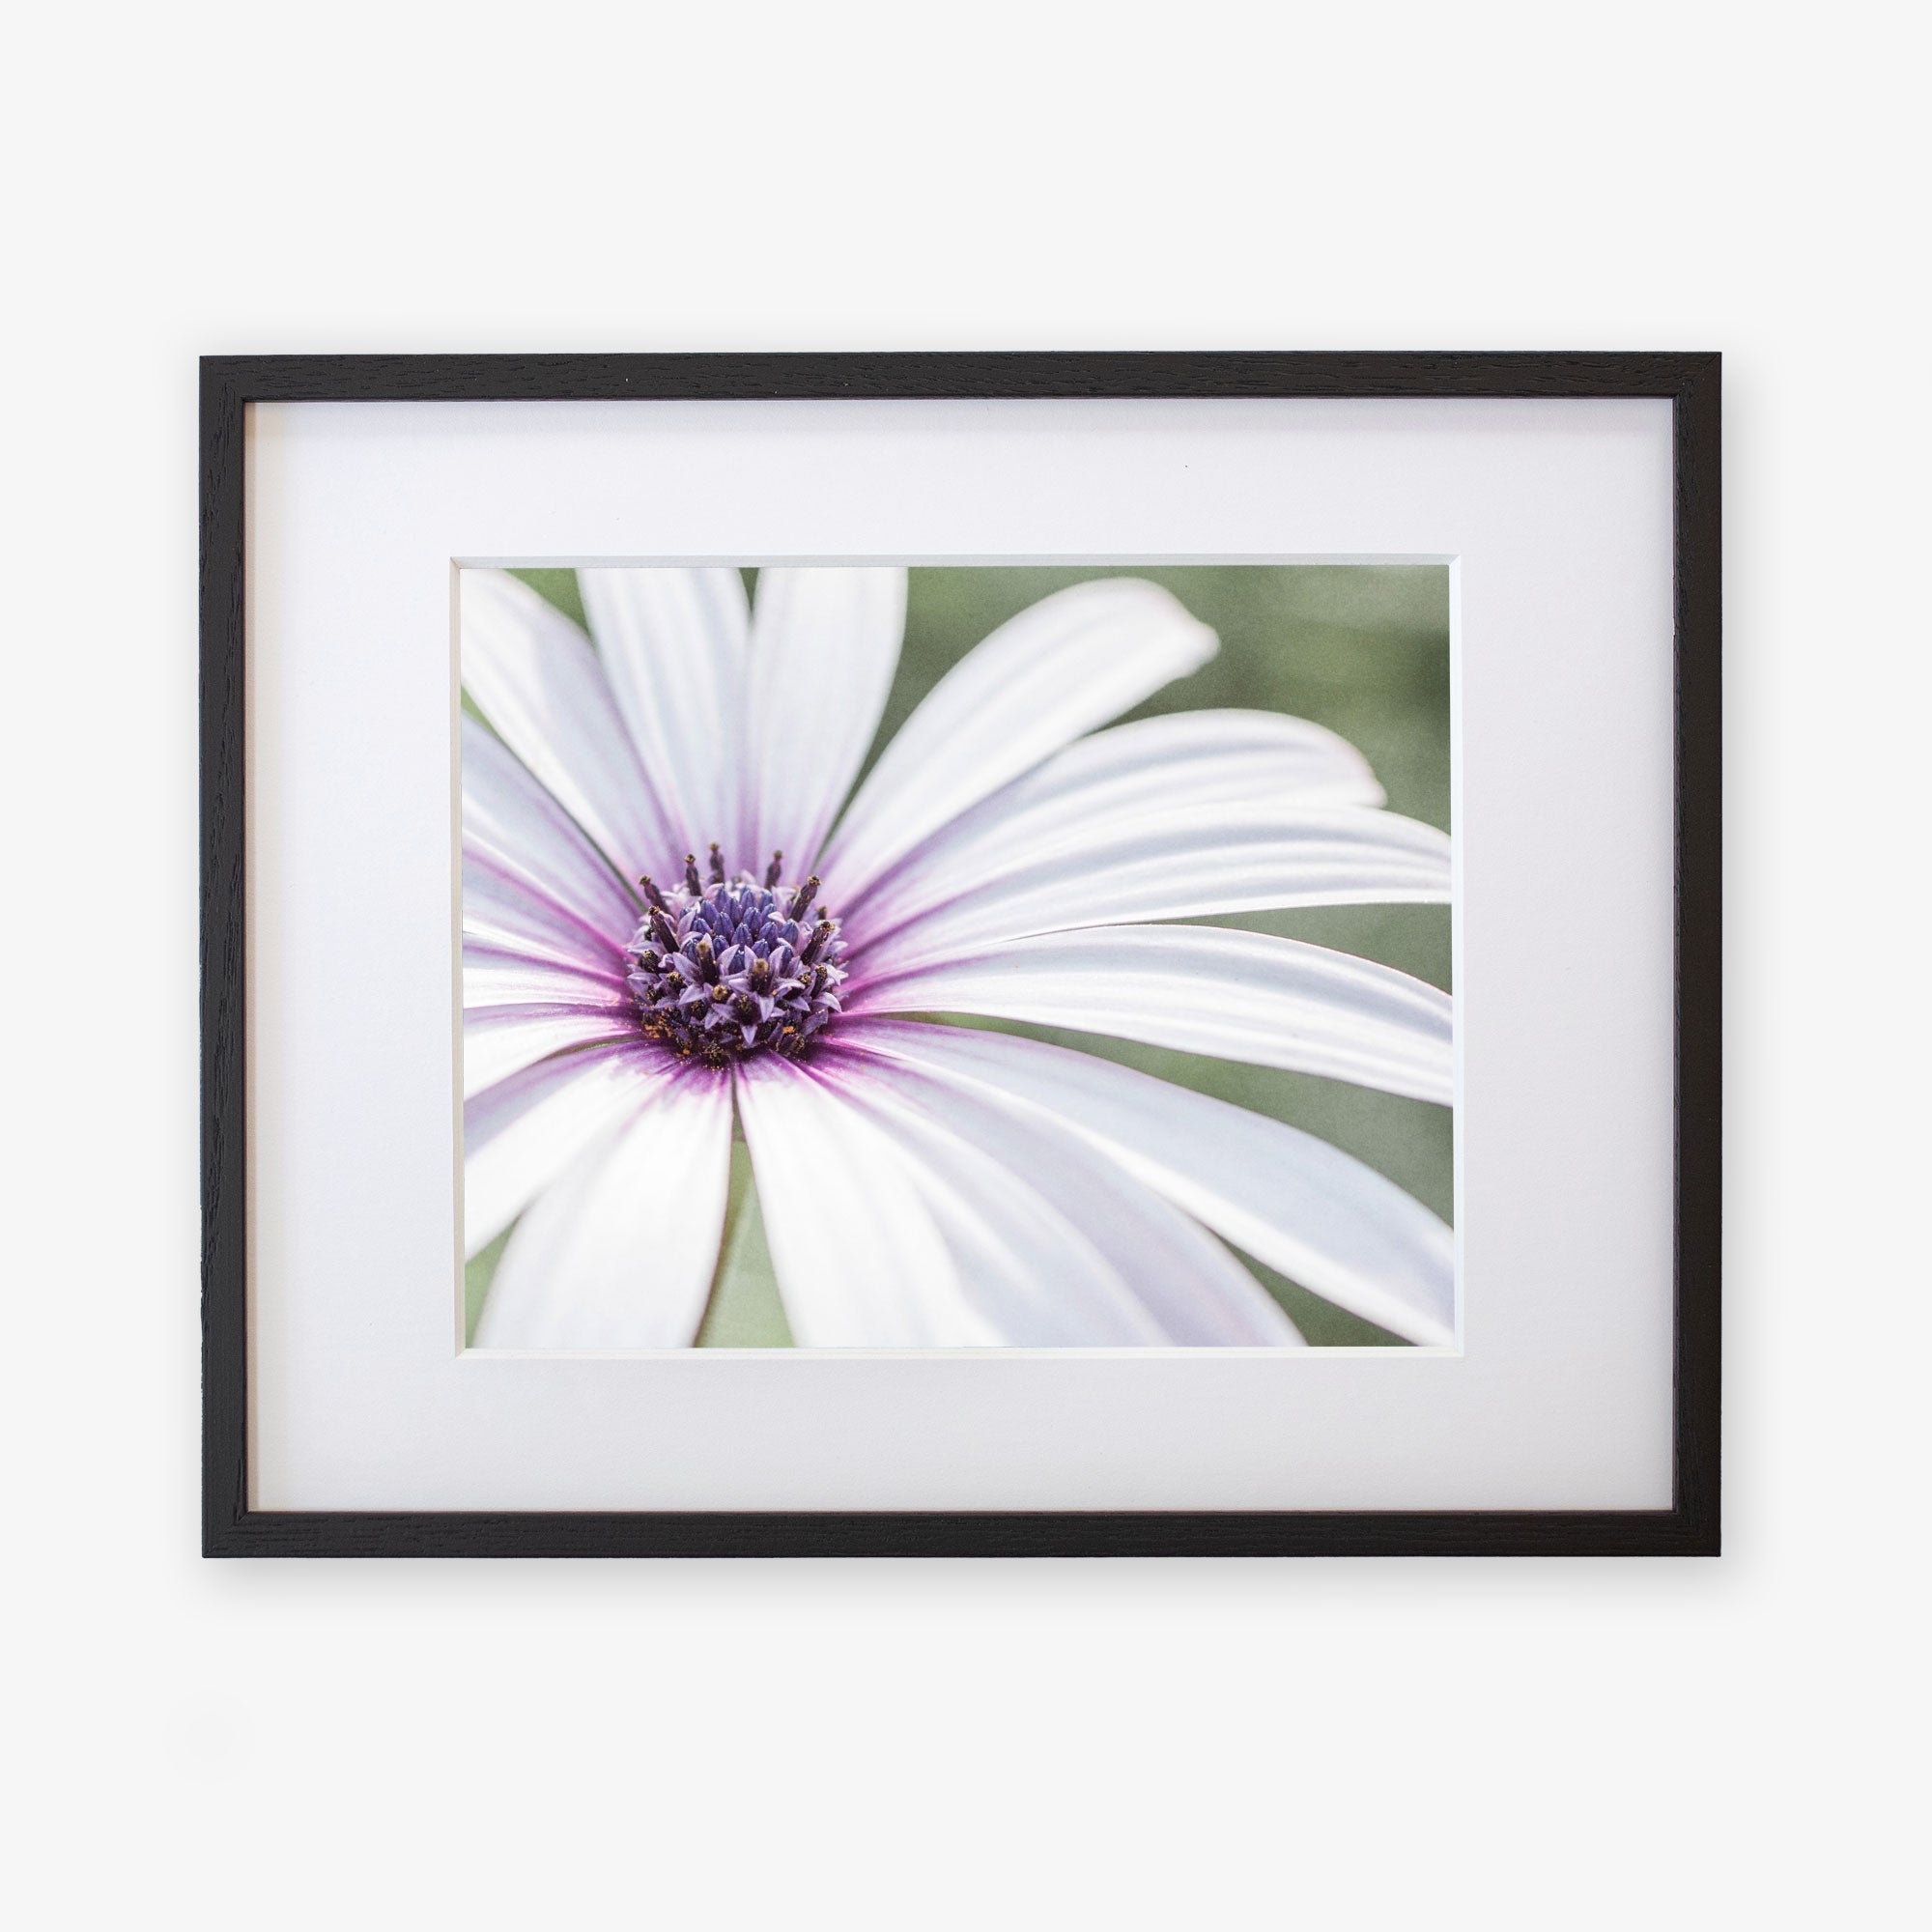 Framed photograph of a Large White Daisy Flower Print from Offley Green, &#39;Bed of Petals&#39;, printed on archival photographic paper, displayed against a simple white background.